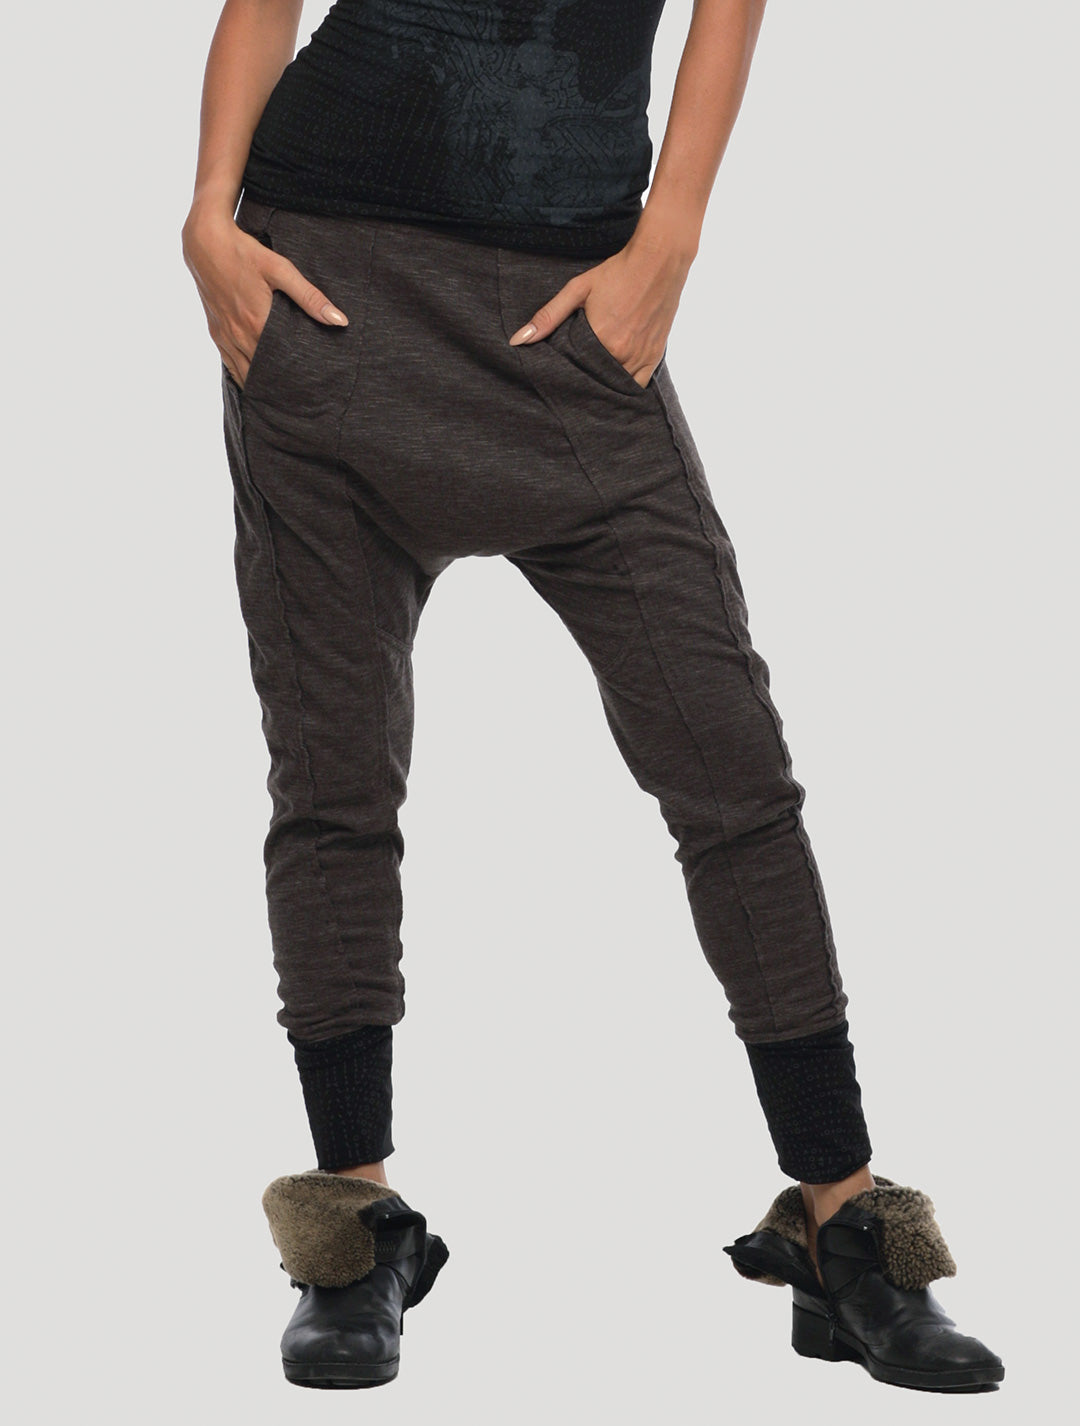 Casual Black Drop Crotch Pants with Overlap